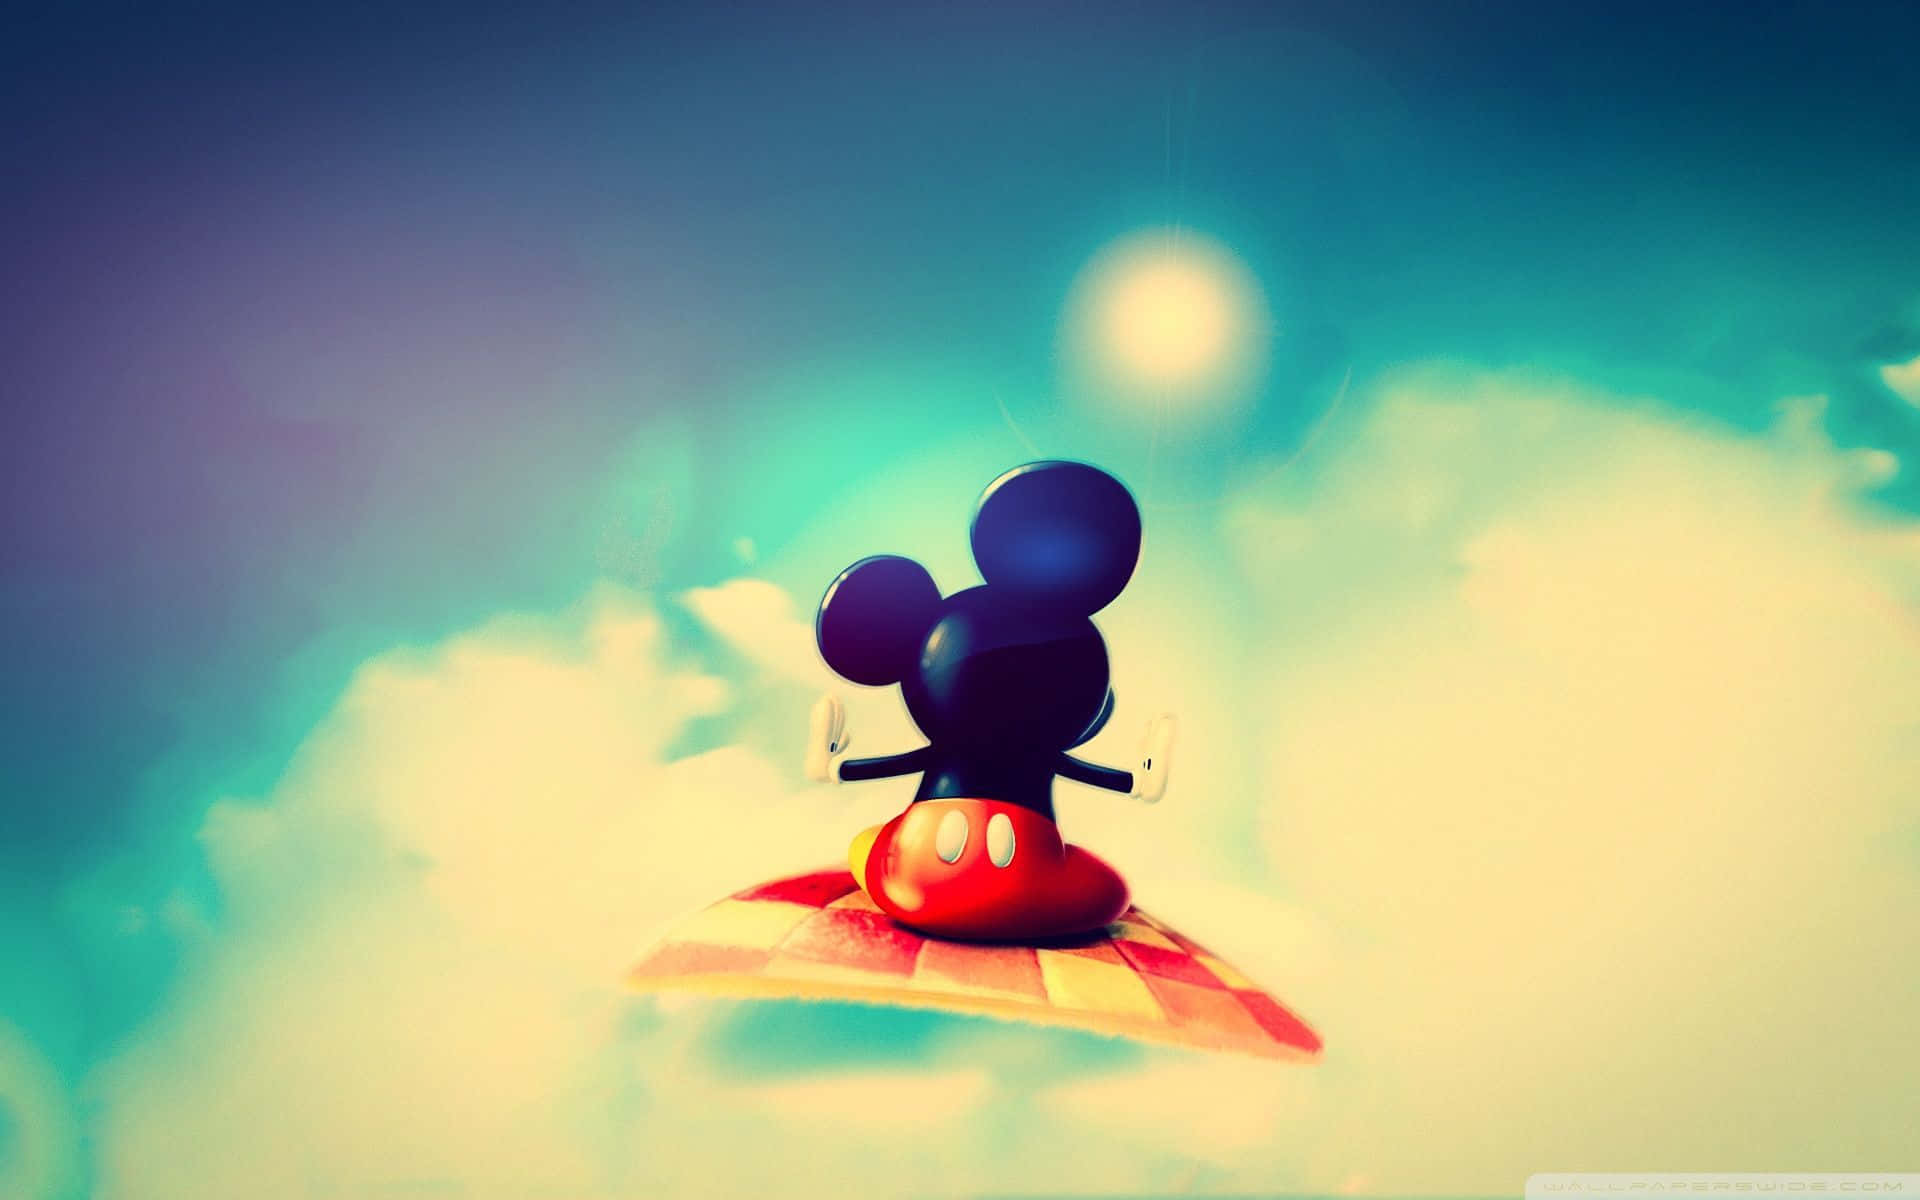 Mickey Mouse on a flying carpet wallpaper - Magic, Mickey Mouse